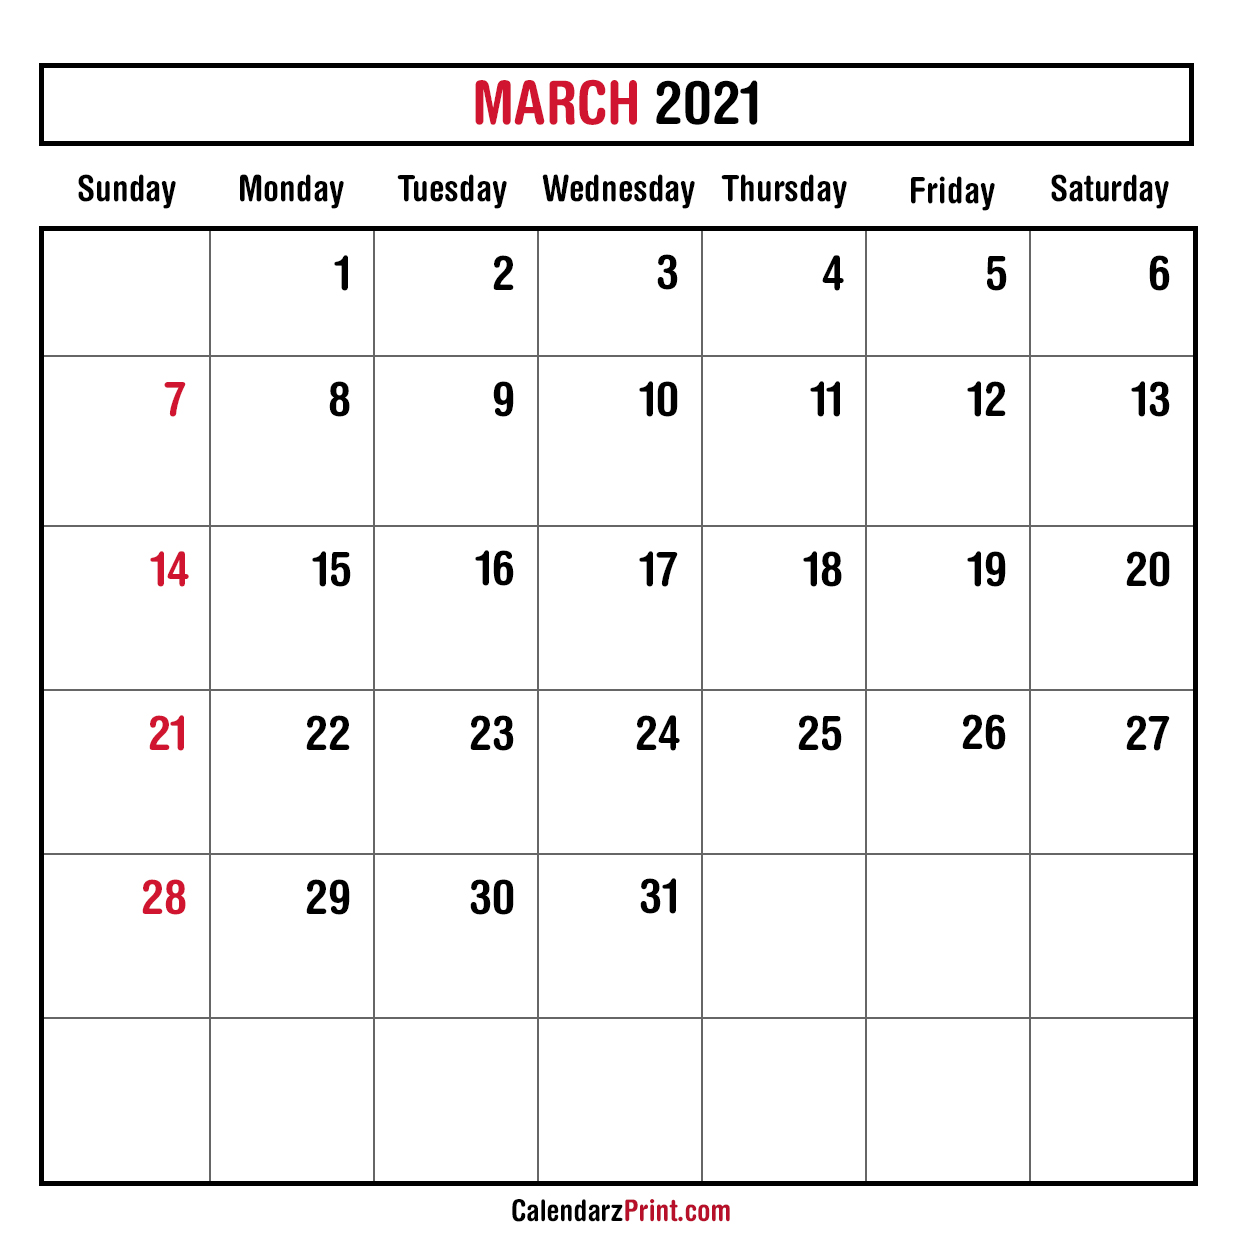 March 2021 Monthly Planner Calendar, Printable Free ...